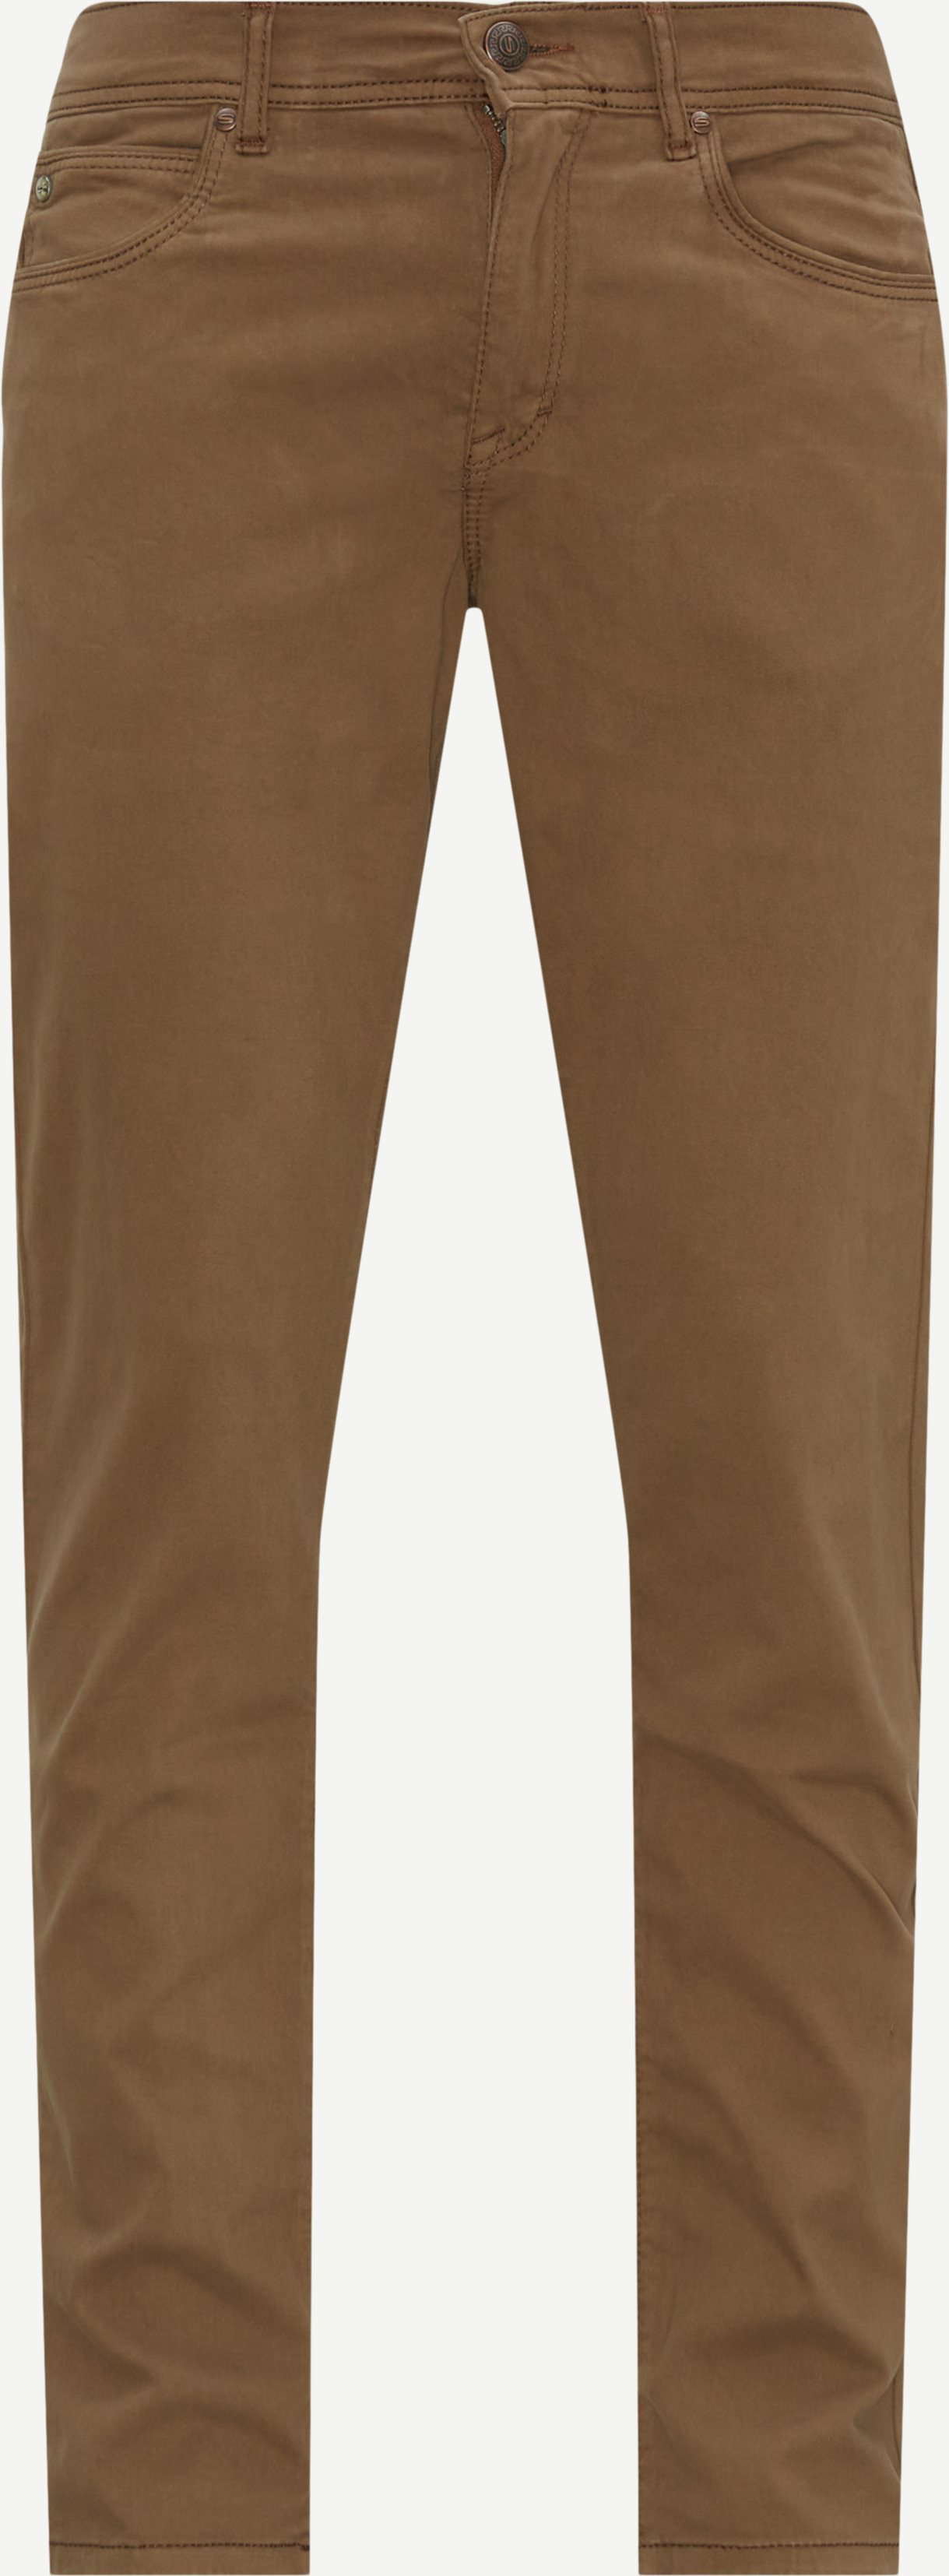 Sand Jeans SUEDE TOUCH BURTON N 2303 Sand